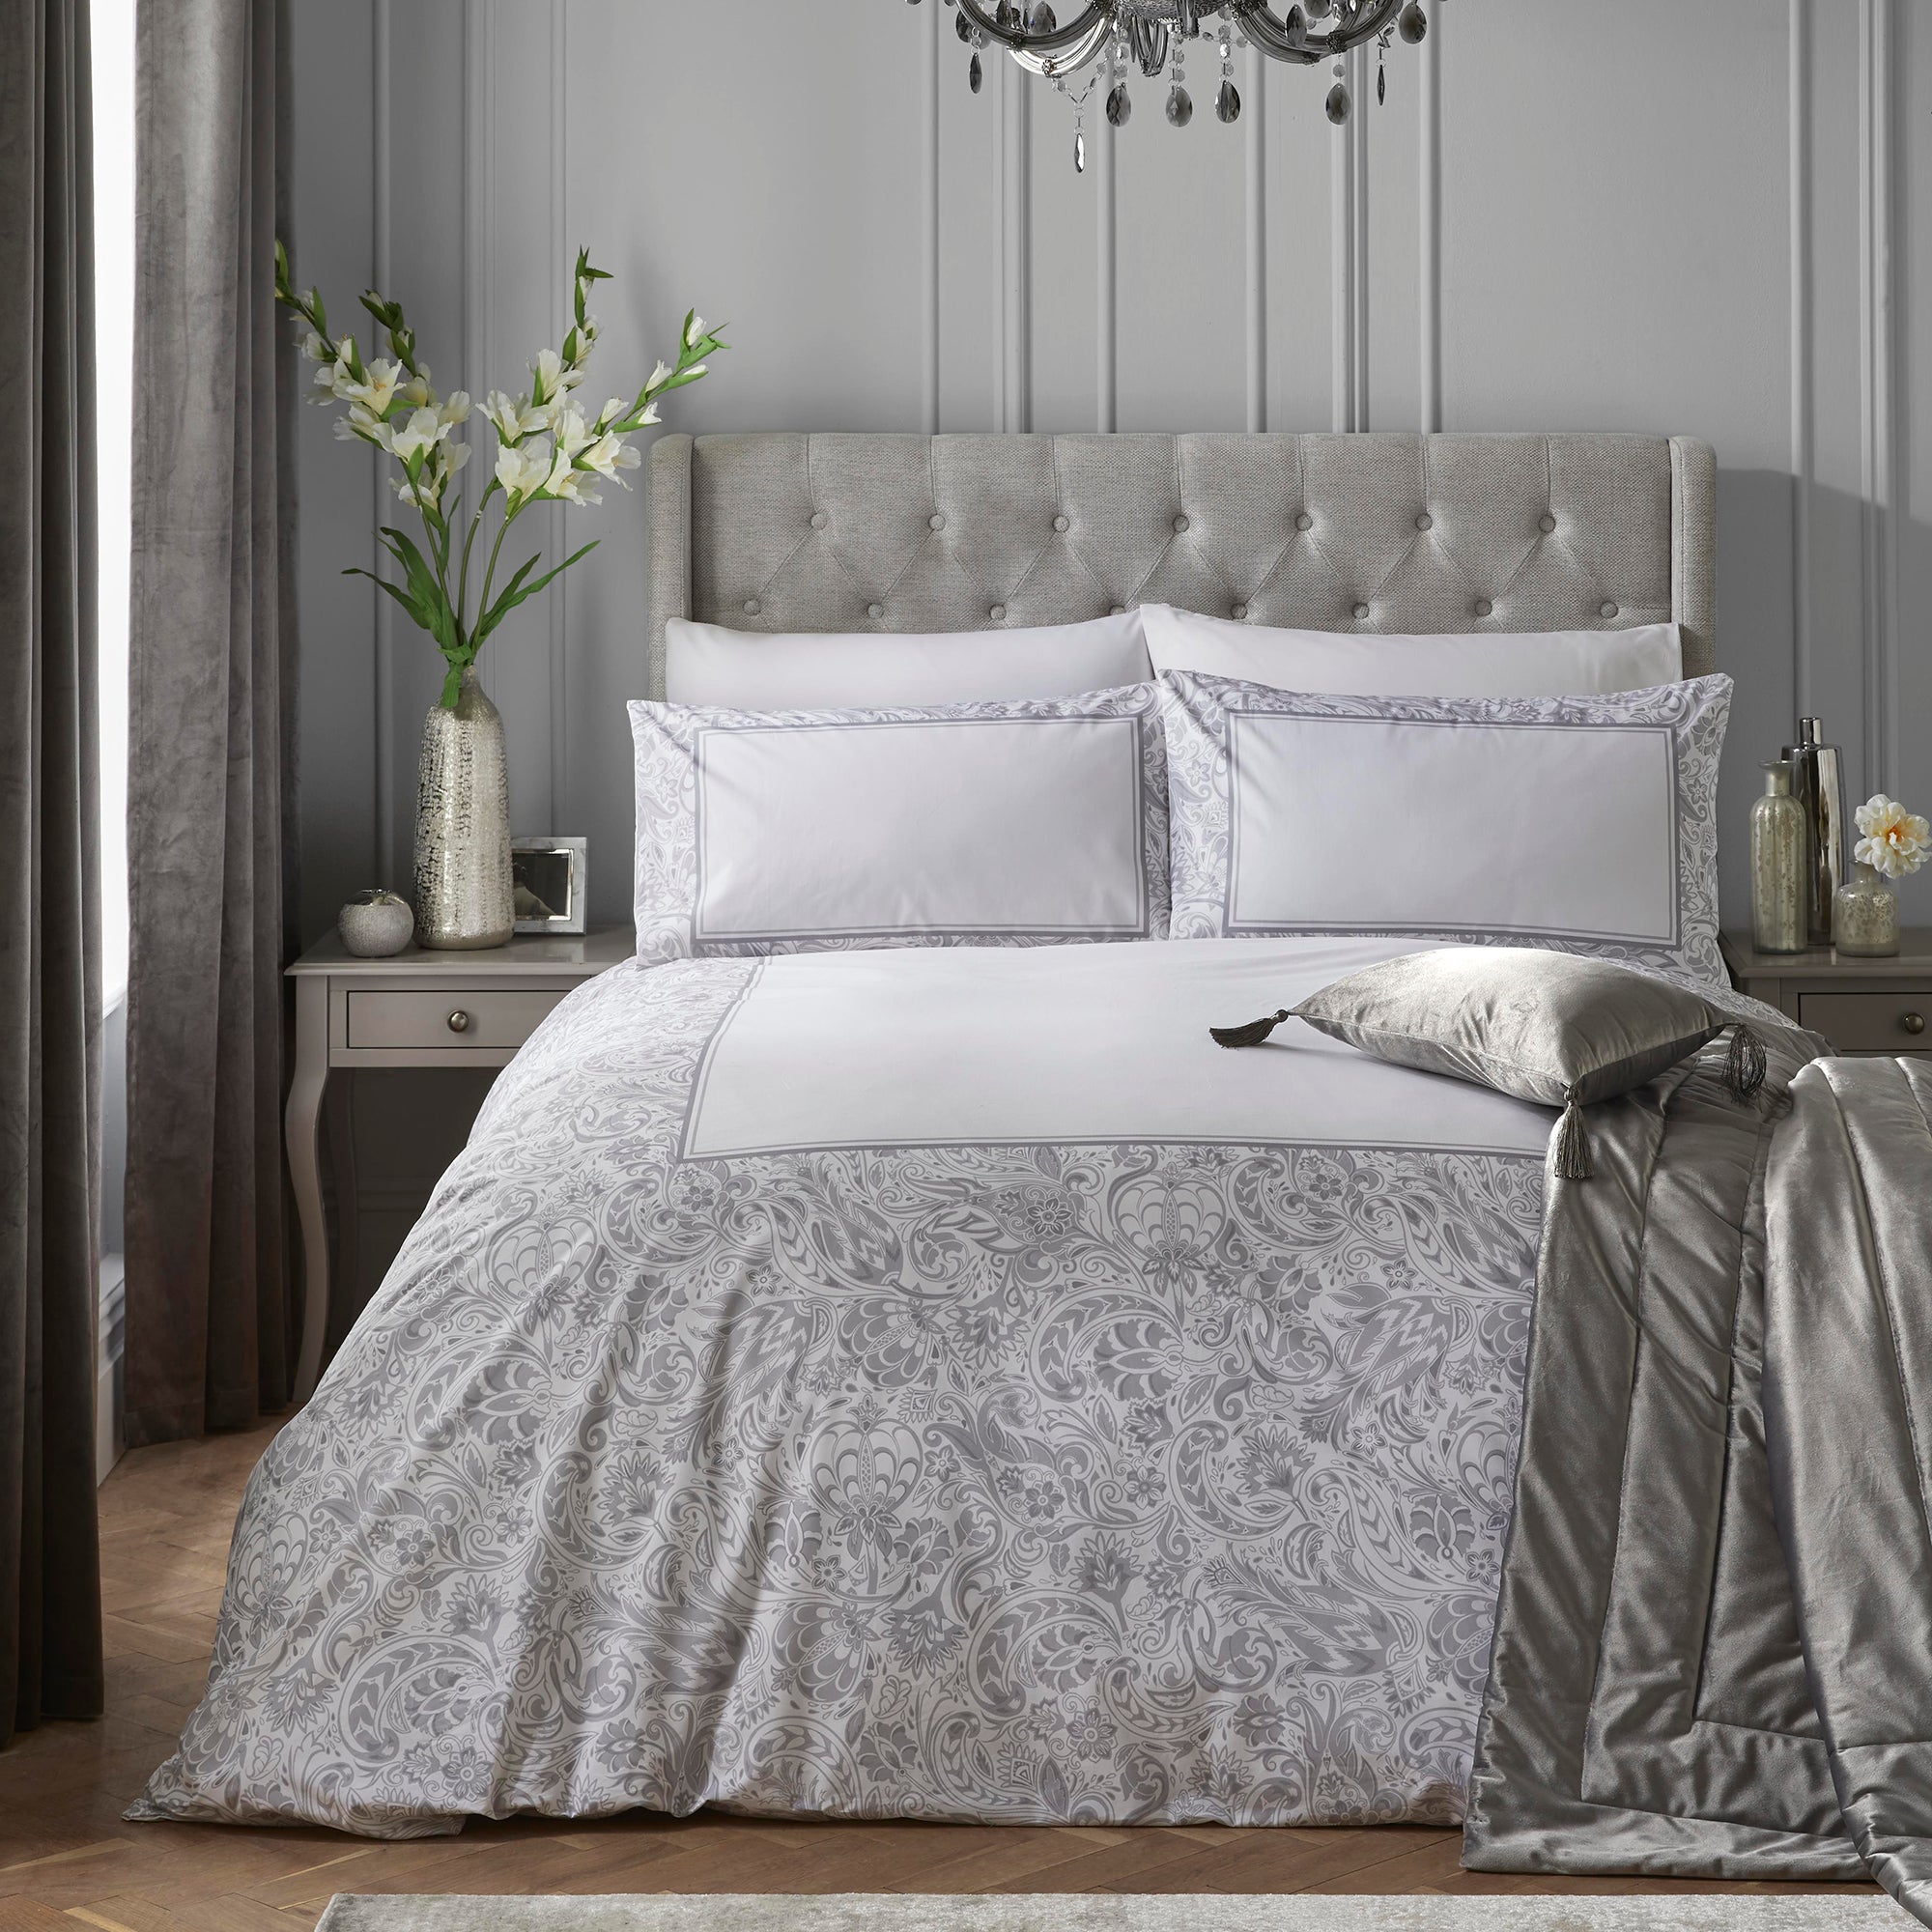 Suzani - 100% Cotton Sateen Duvet Cover Set in Grey - by Laurence Llewelyn-Bowen